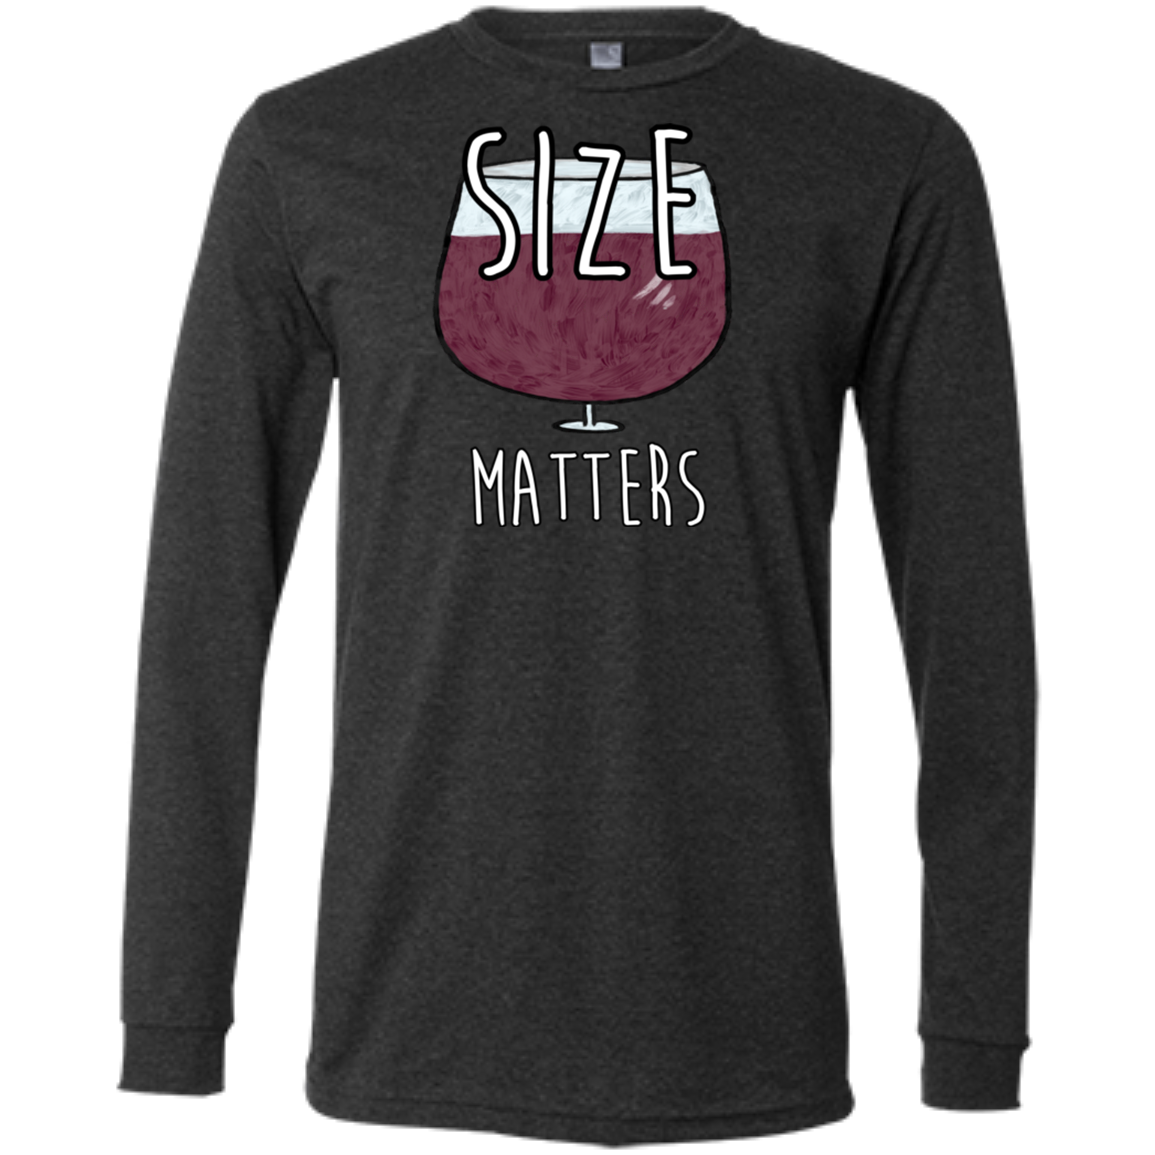 Funny Size Matters Wine Lover Enthusiast Unisex Long Sleeve T-Shirt Gifts